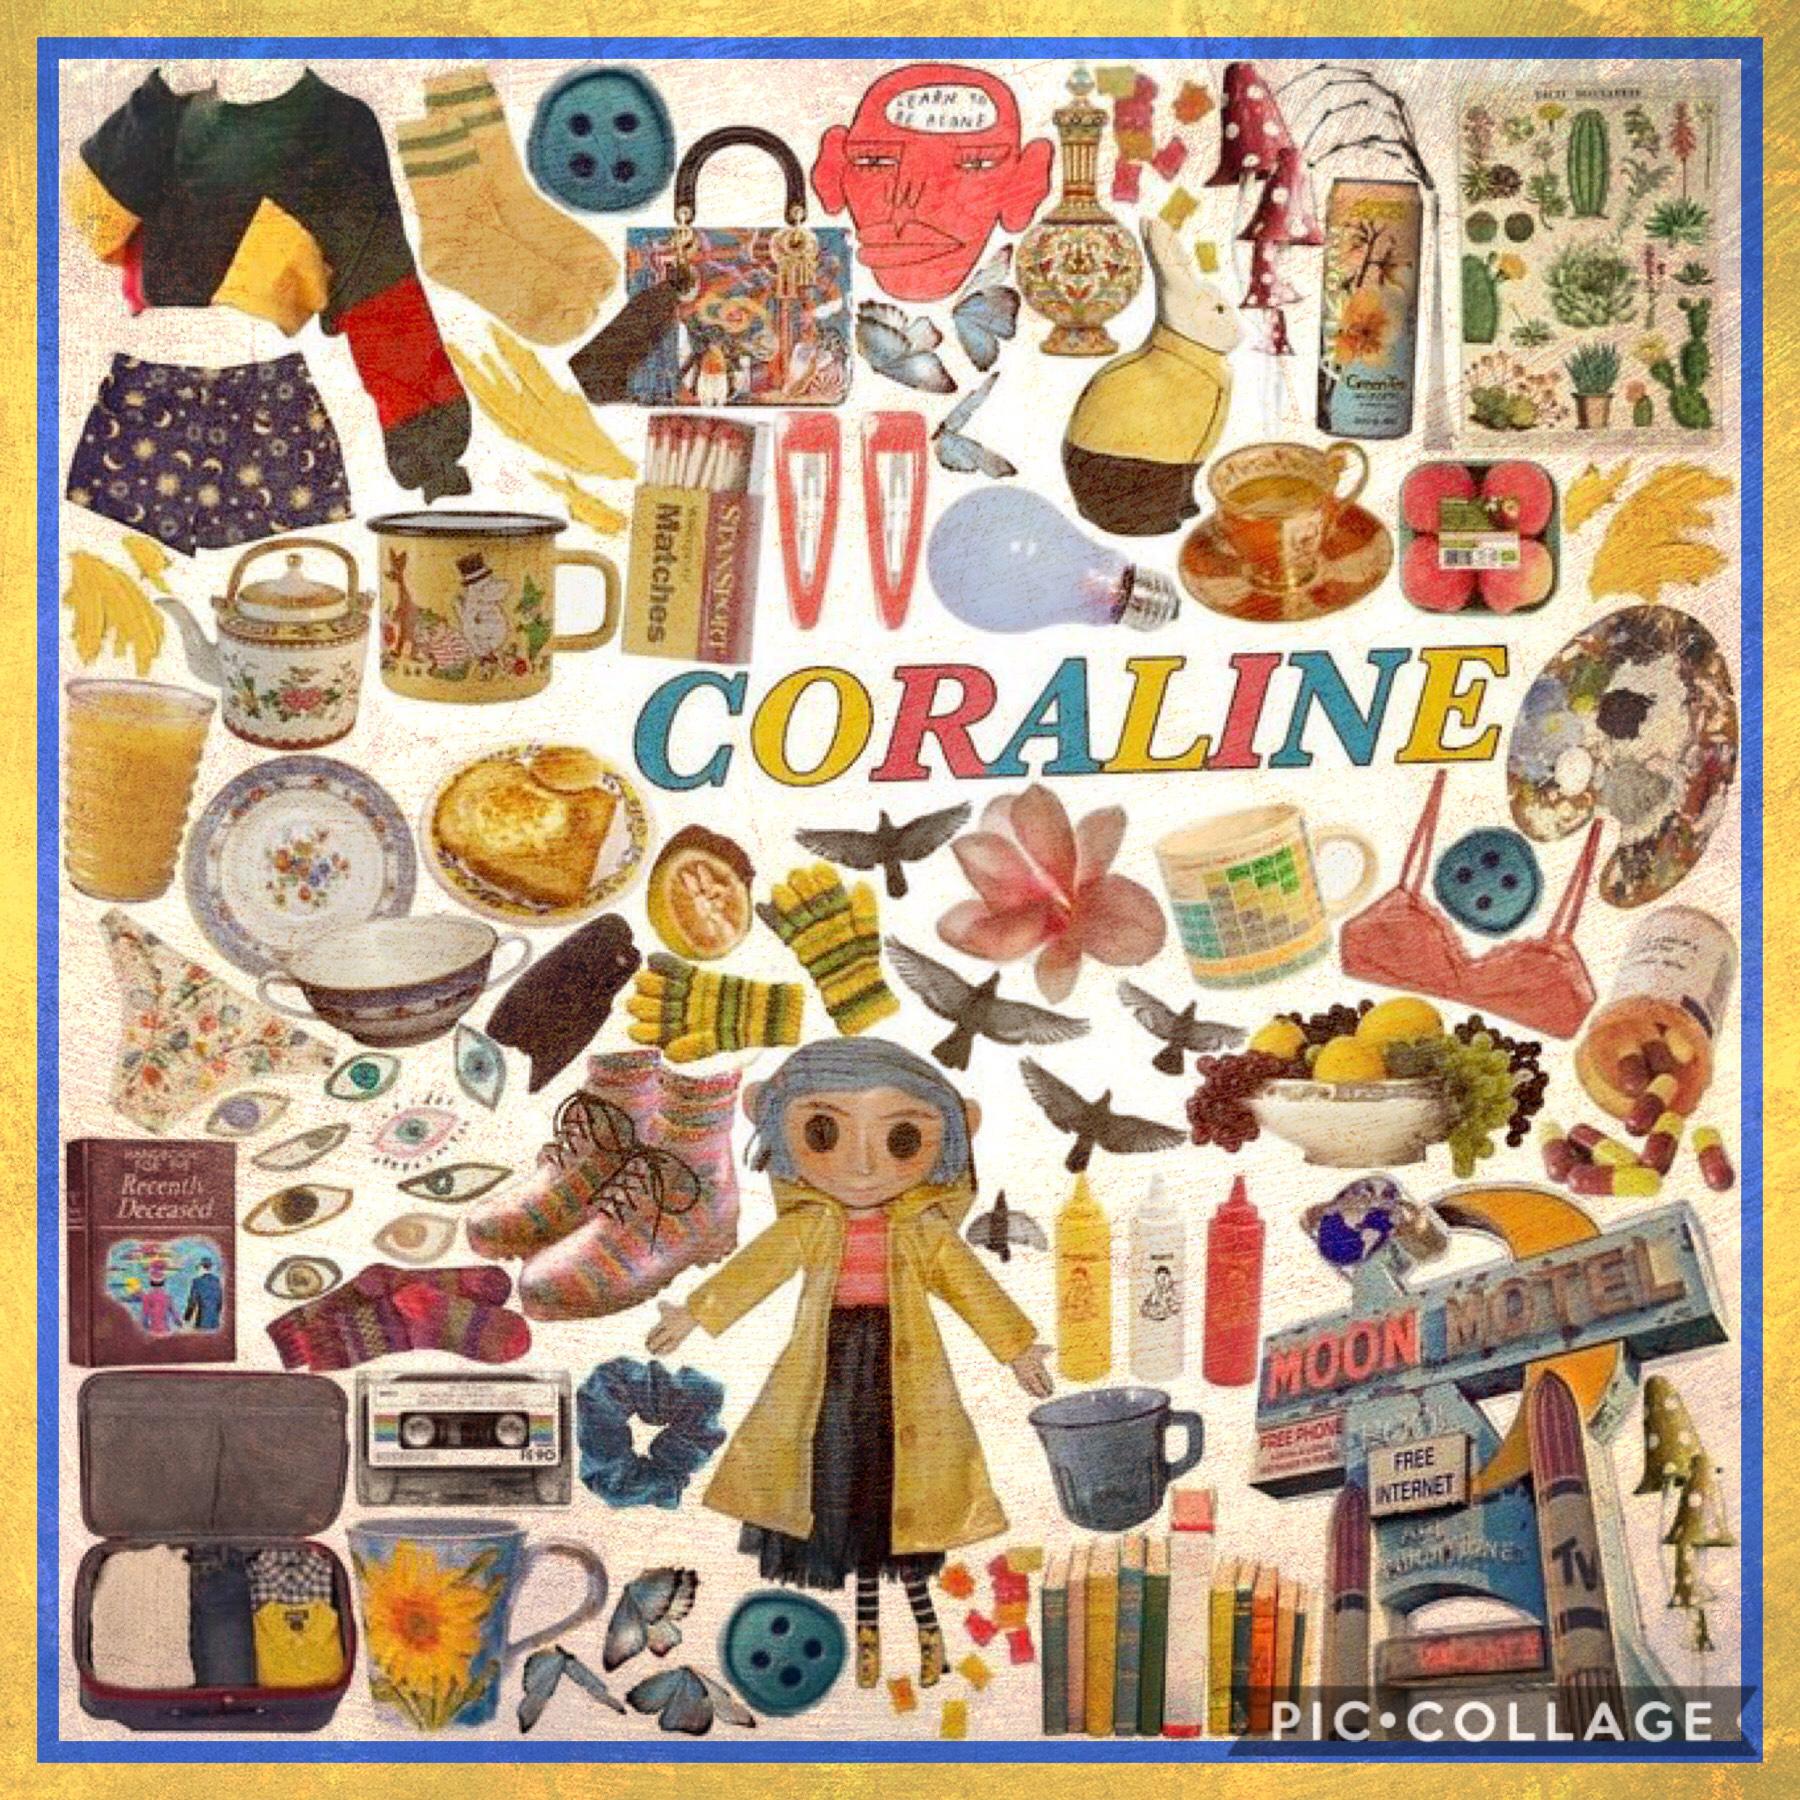 💛Tap💛
Here’s a moodboard for the movie Coraline! 
QOTD: What is your fav Non-Taylor Swift song at the moment?
AOTD: Siren by Kailee Morgue and Blood in the Cut by K.Flay